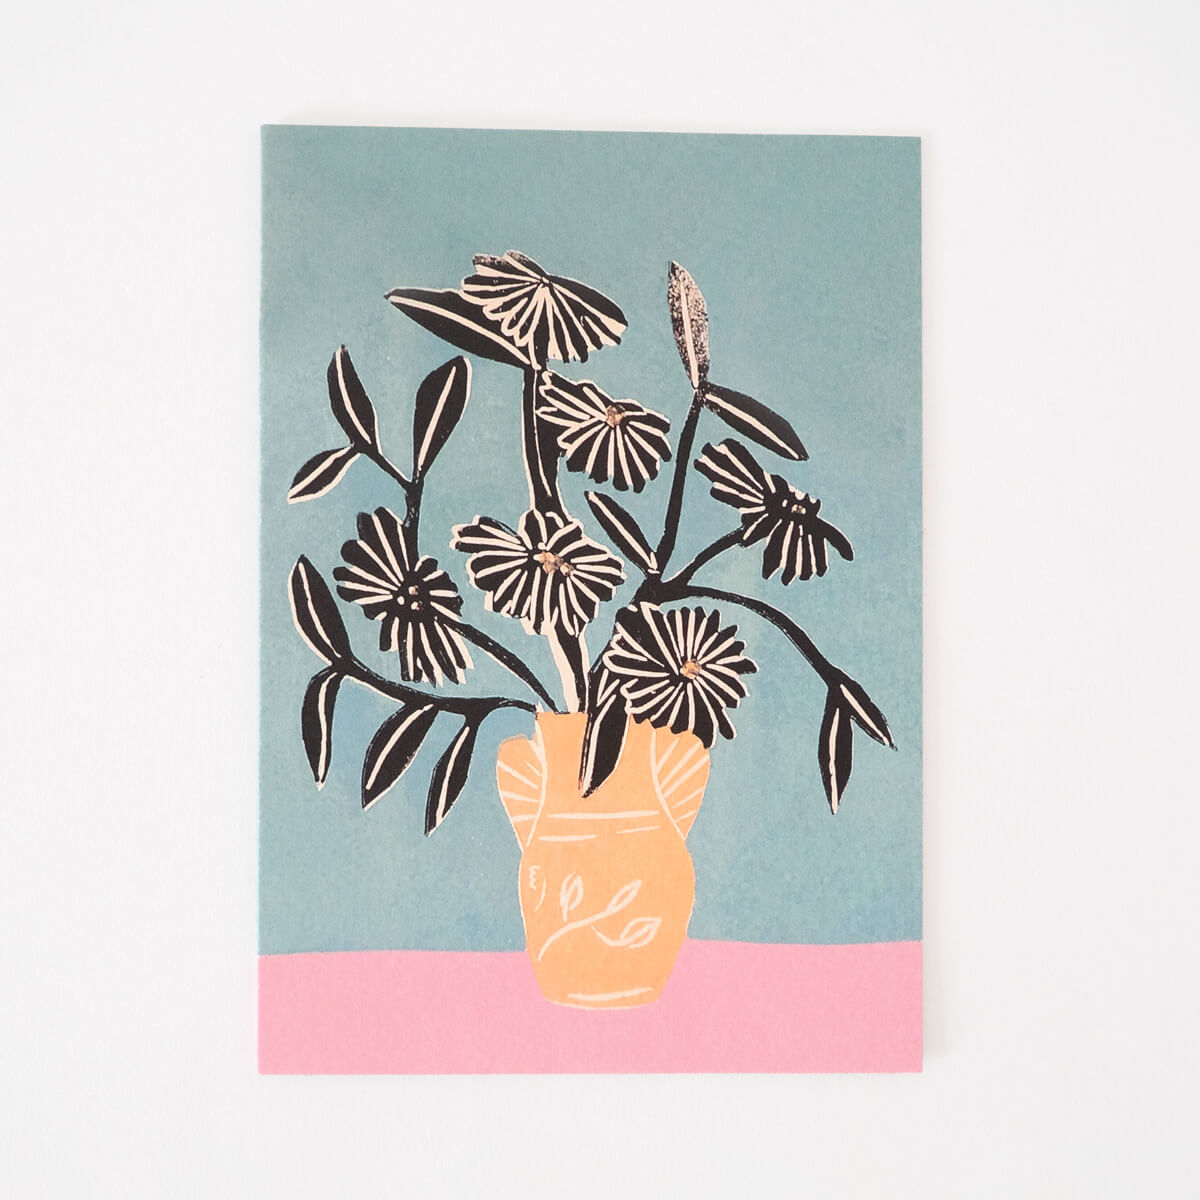 Greeting card featuring beautiful blooms in a peachy vase.